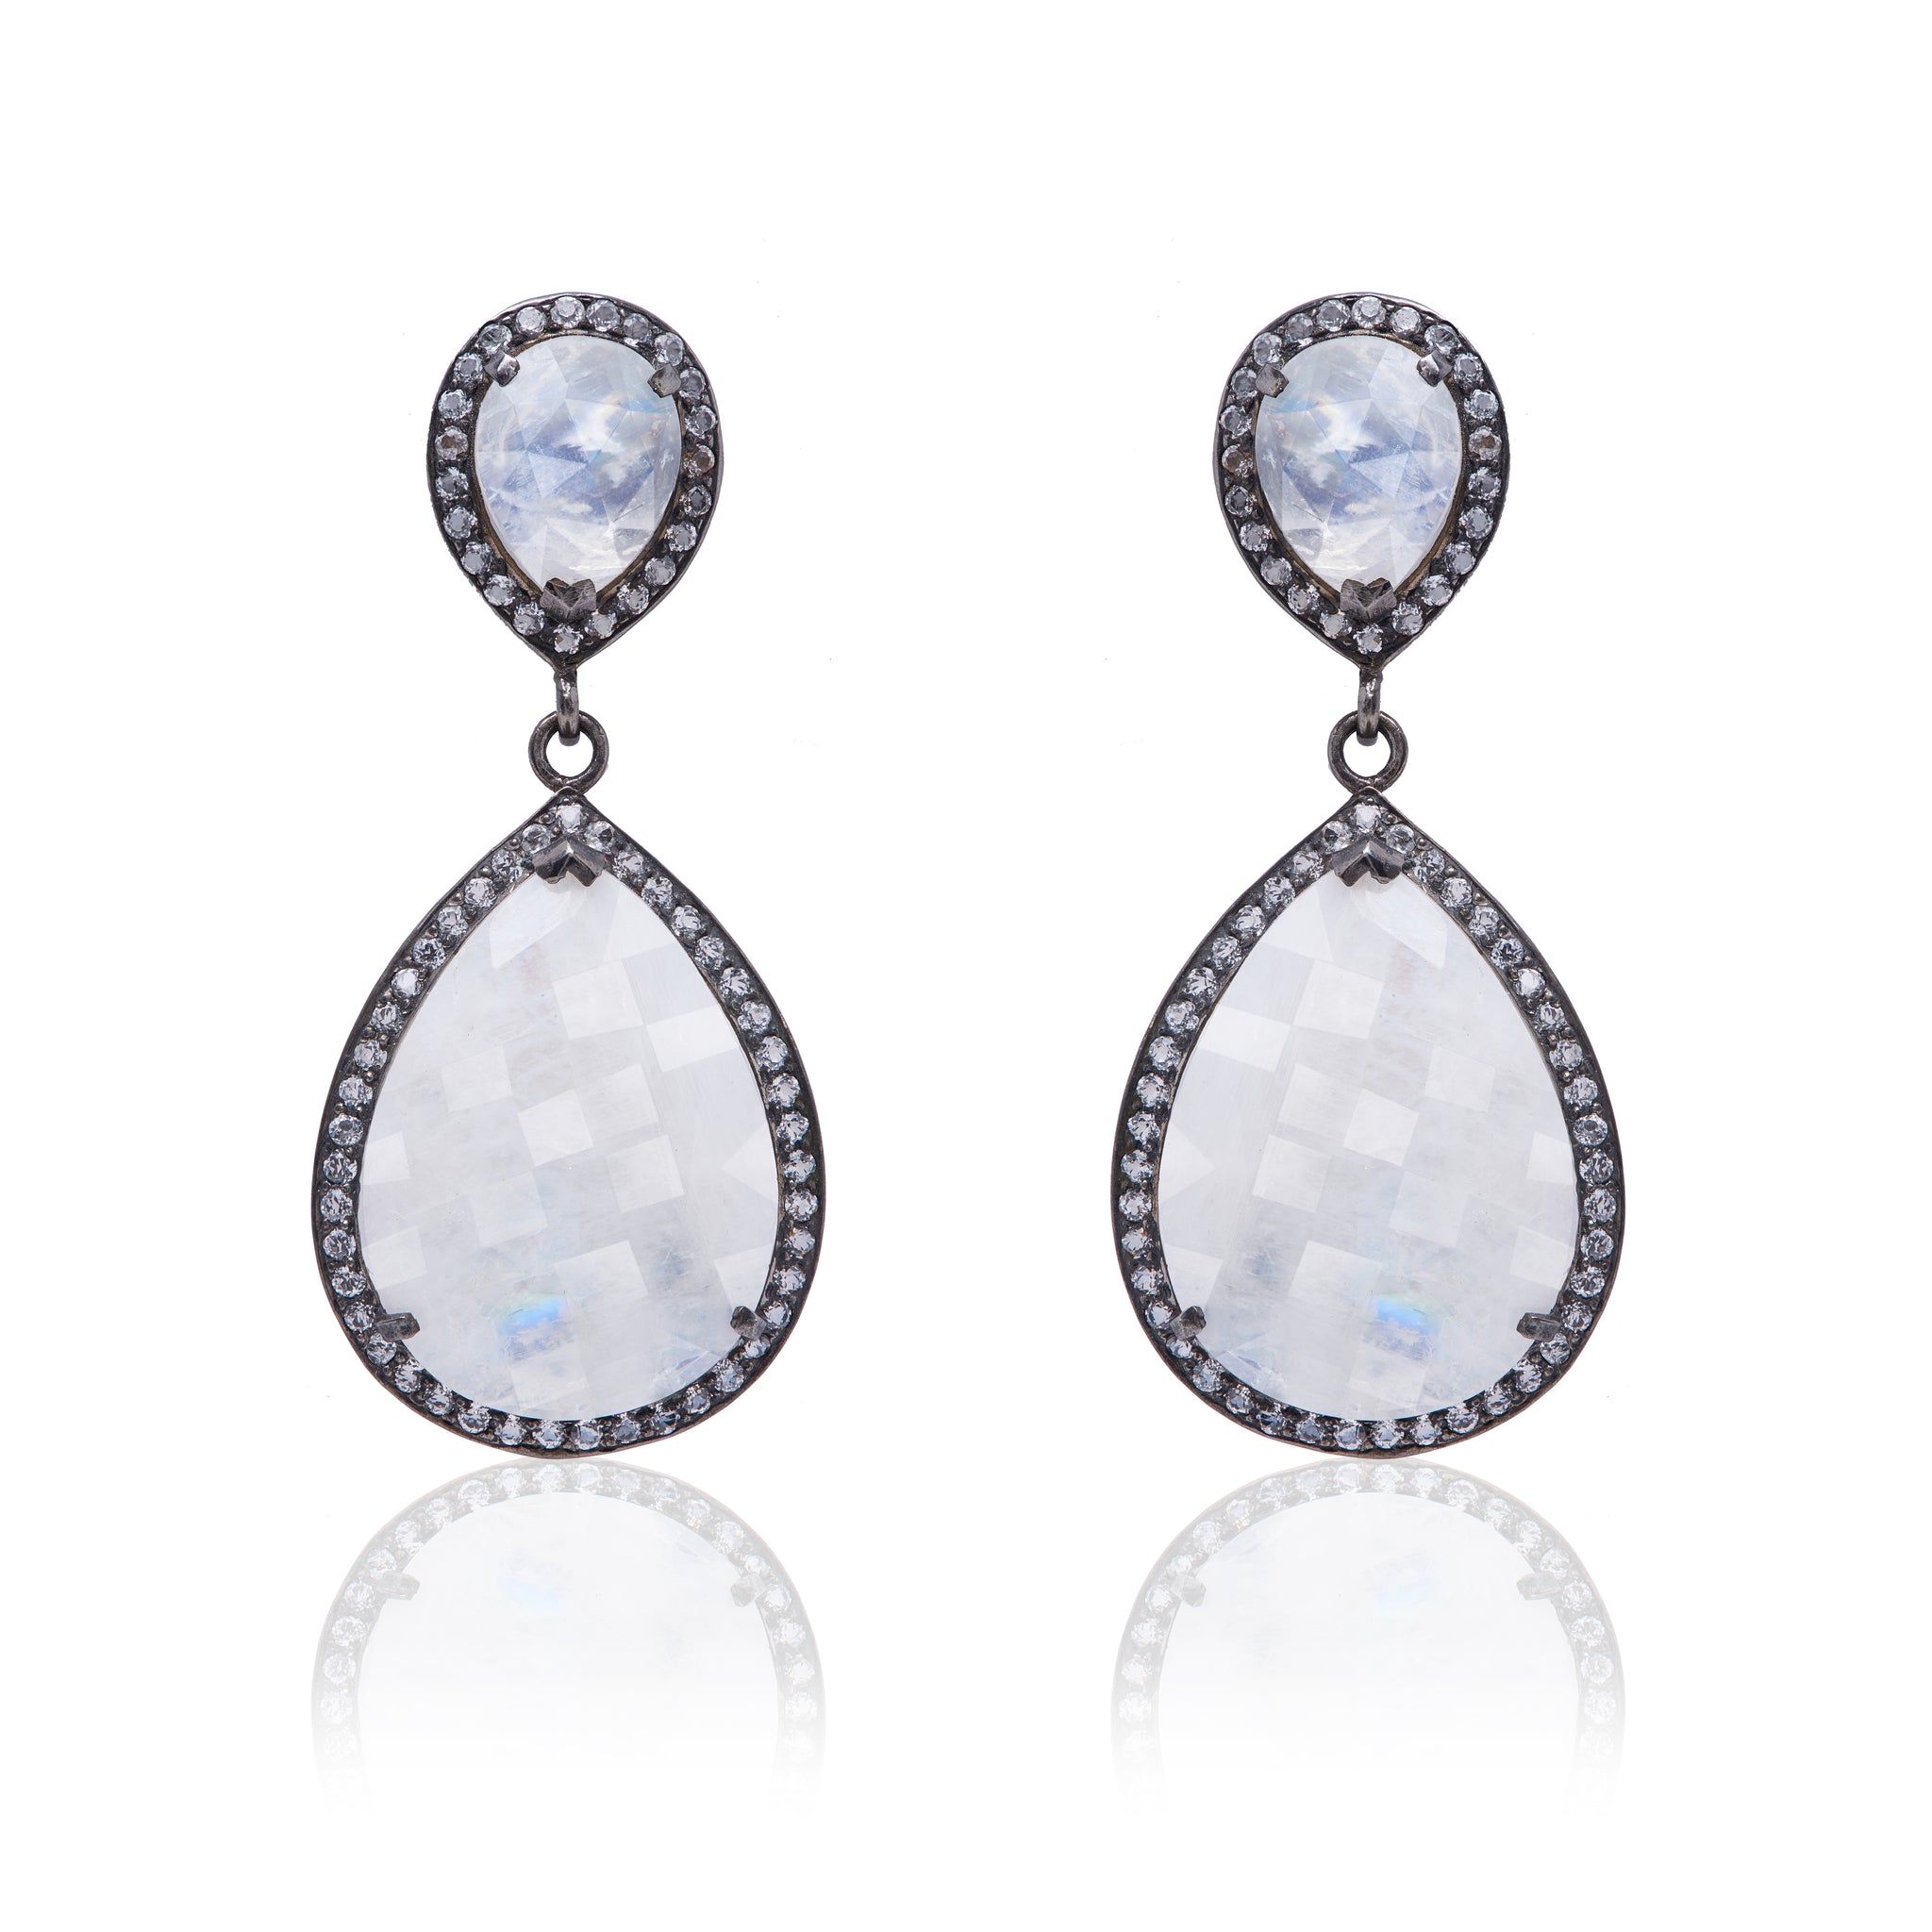 Double Faceted Moonstone earrings with white topaz made in sterling silver